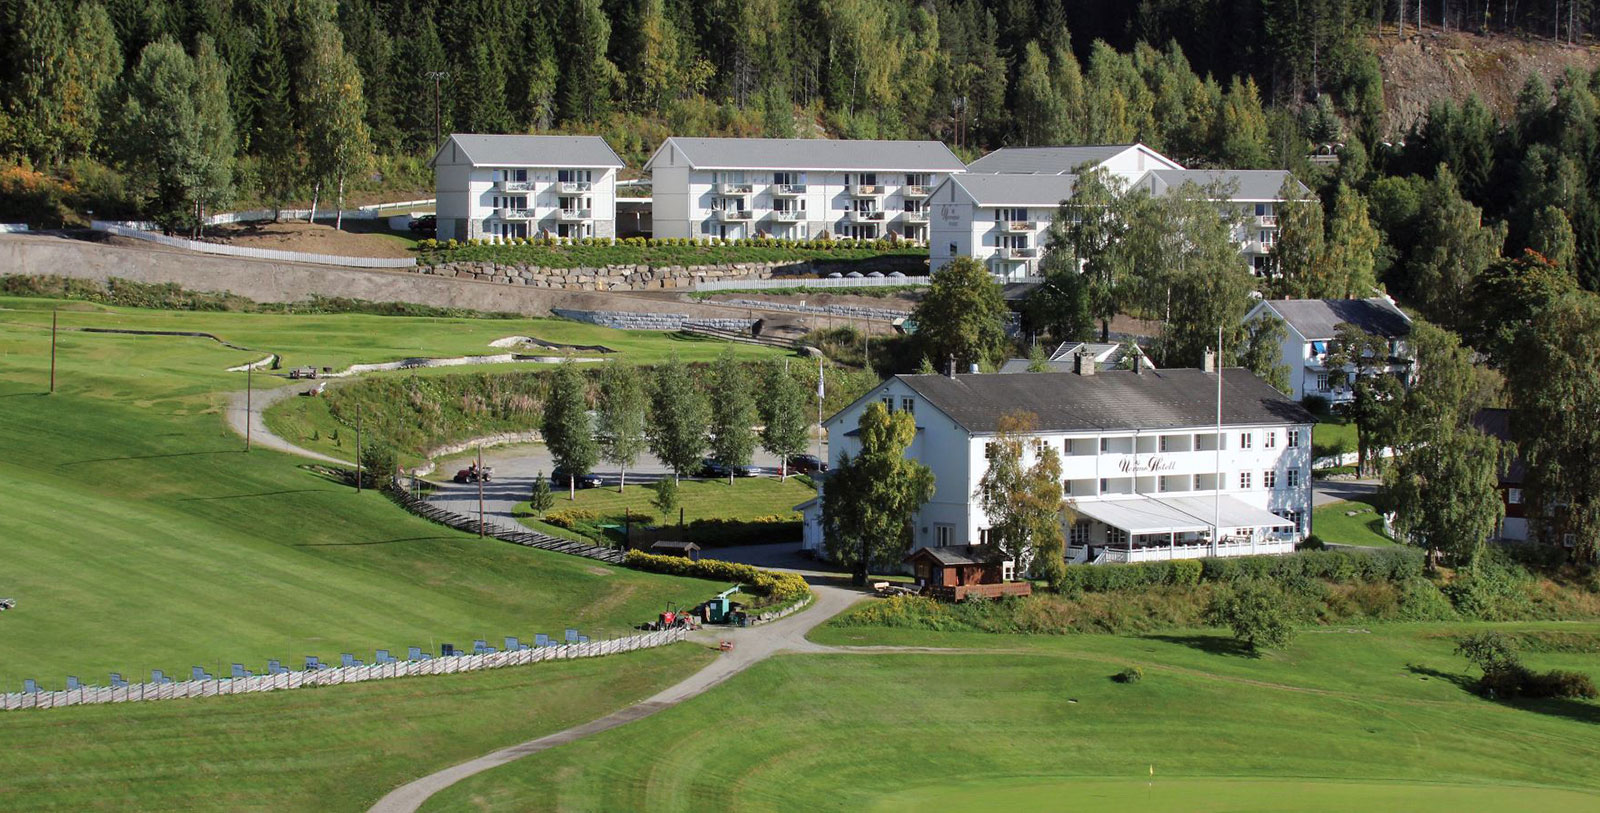 Image of Aerial View of Hotel Nermo Hotell & Apartments, 1442, Member of Historic Hotels Worldwide, in Oyer, Norway, Overview